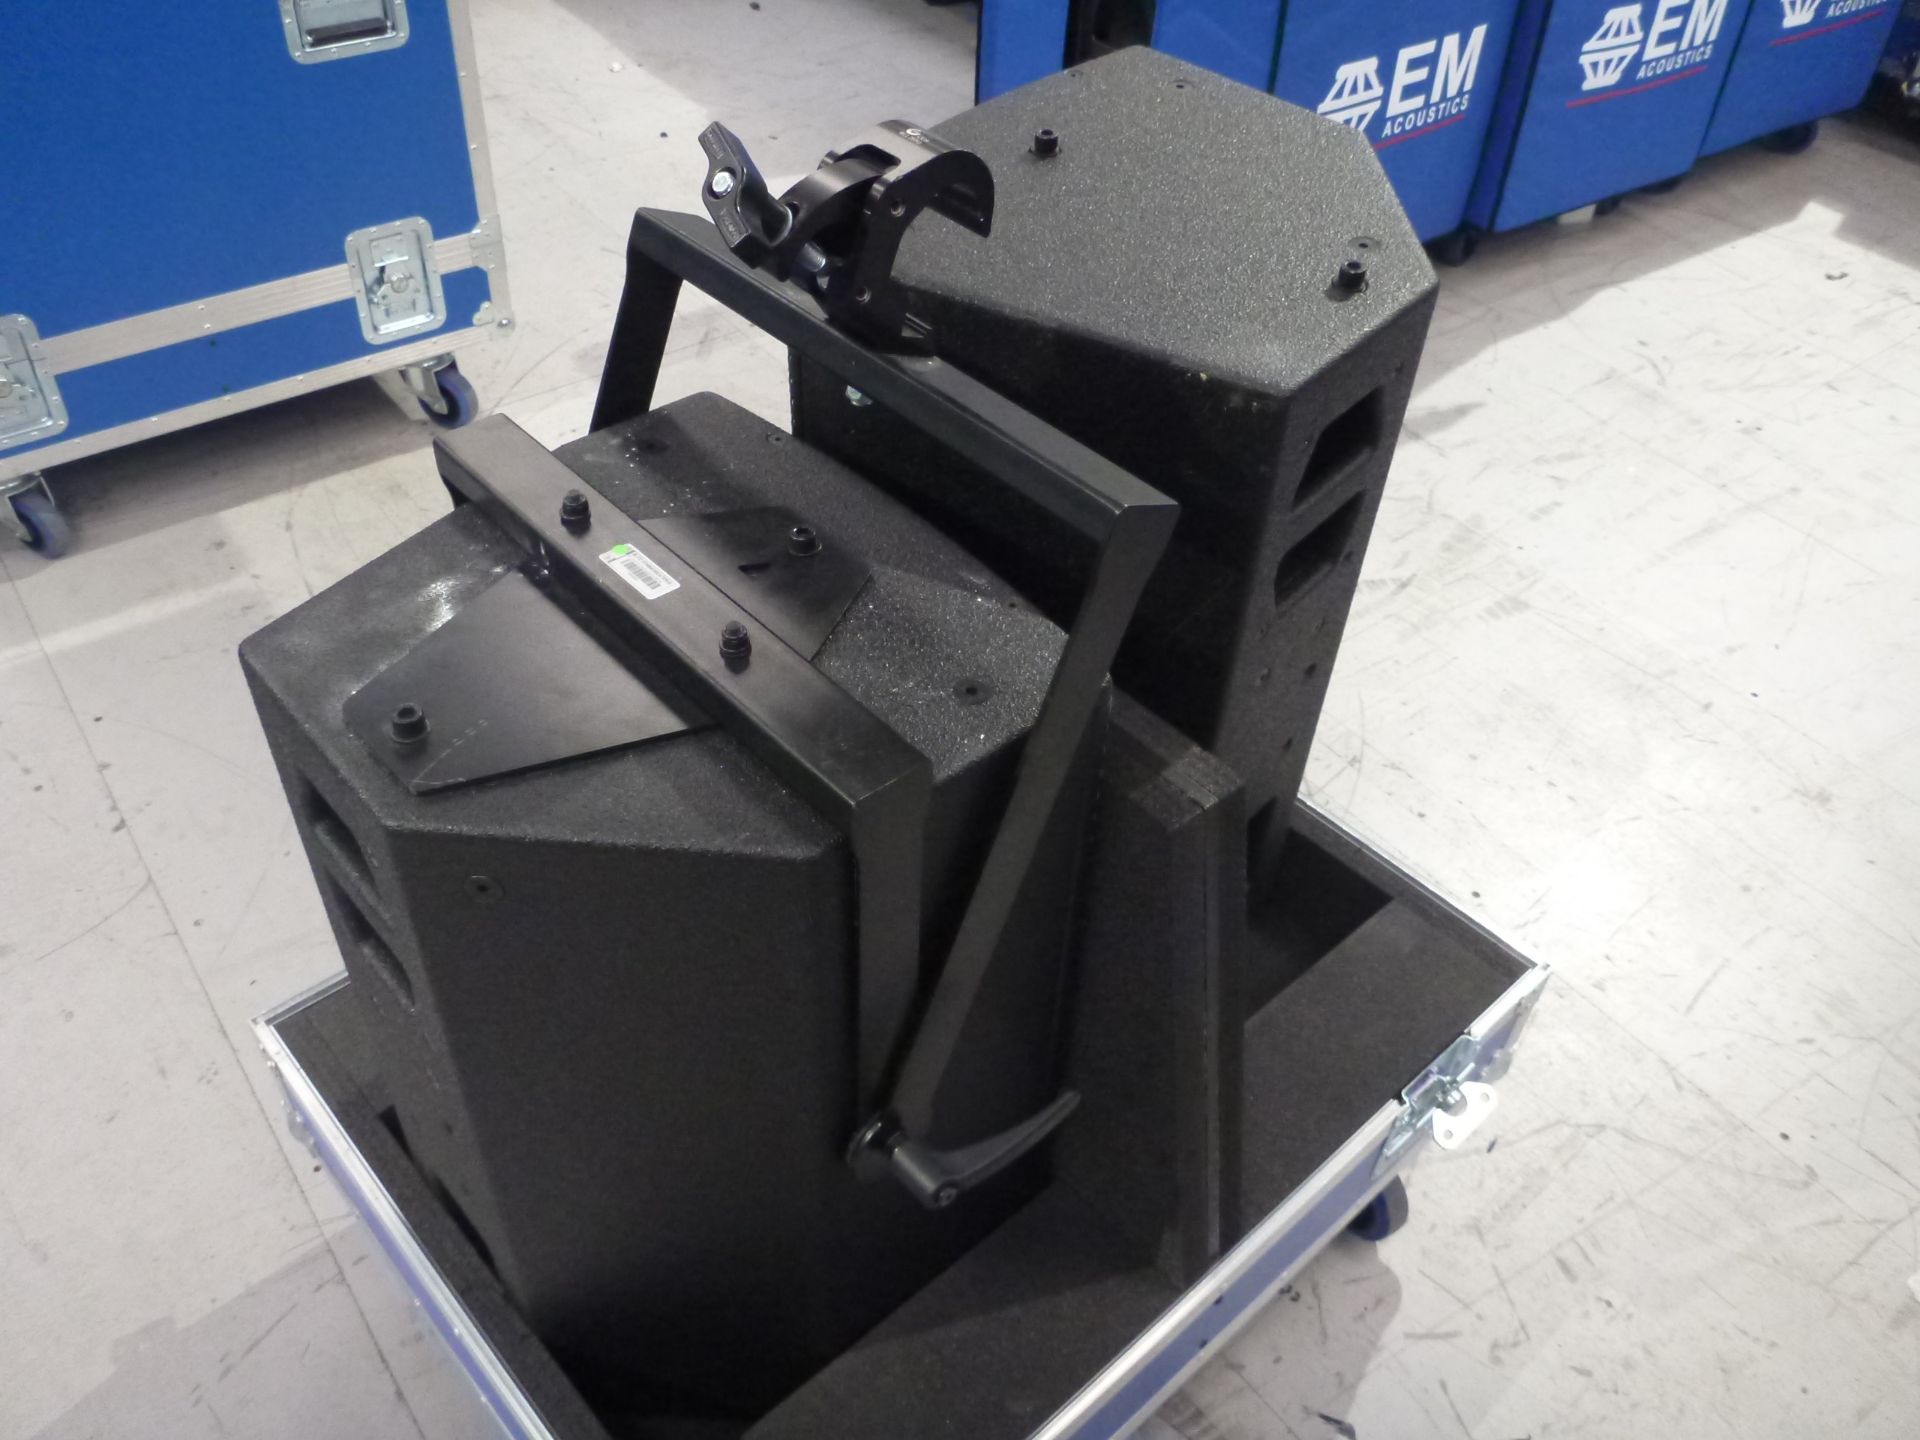 EM Acoustics EMS-129 Wide Dispersion Passive Loudspeakers (Pair) In flight case with 1 x flying - Image 4 of 7